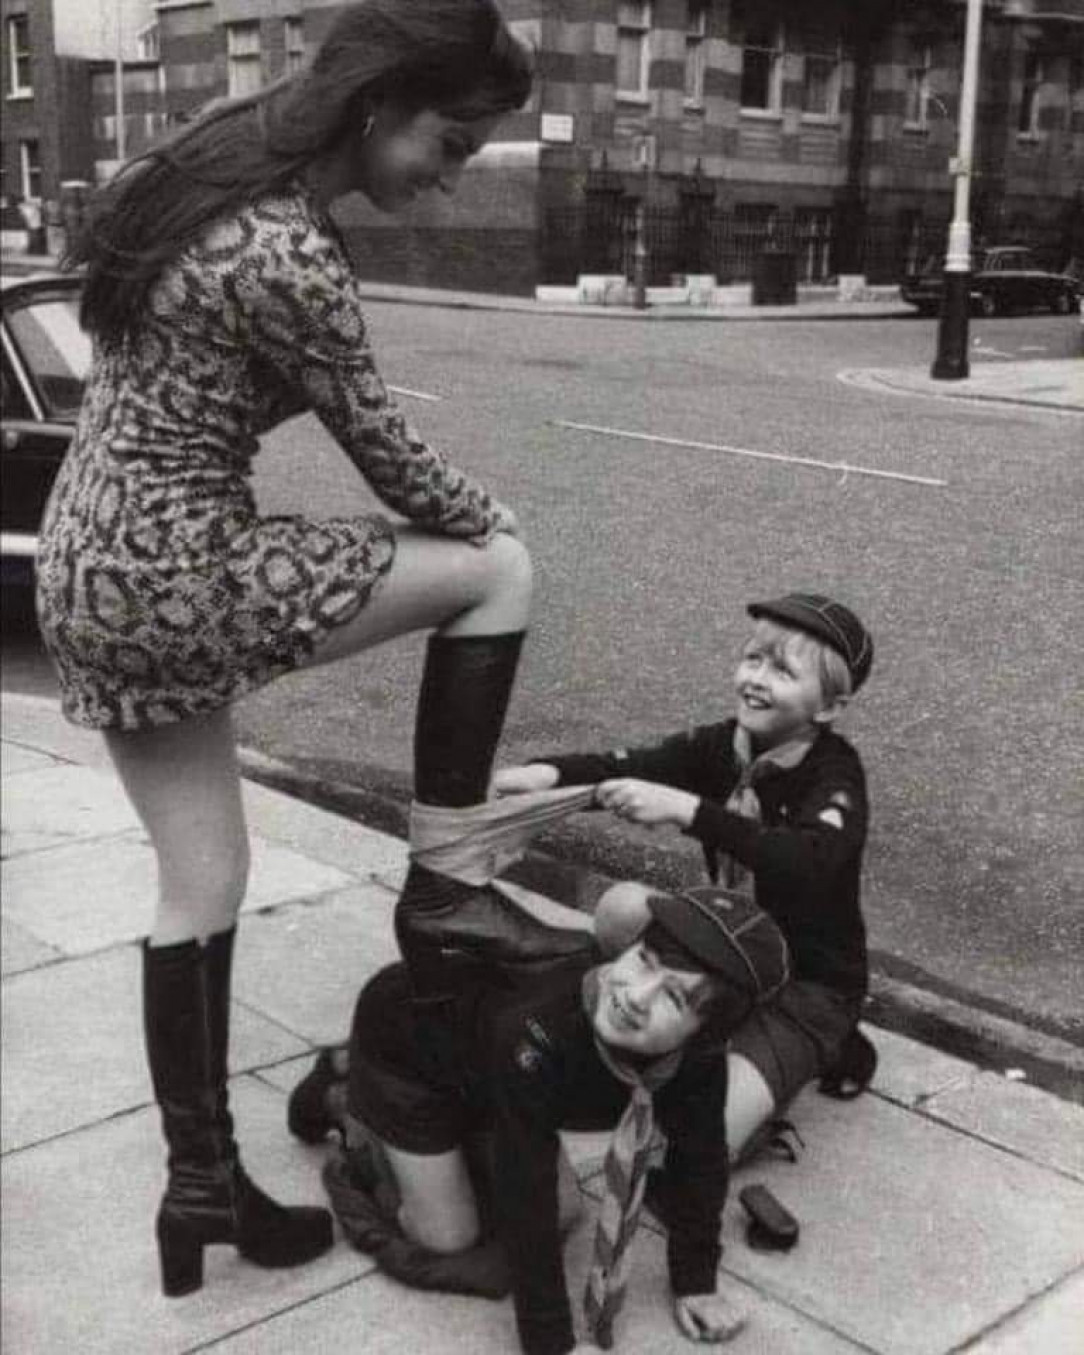 Actress Caroline Munroe getting her boots shined by Cub Scouts in London, 1972